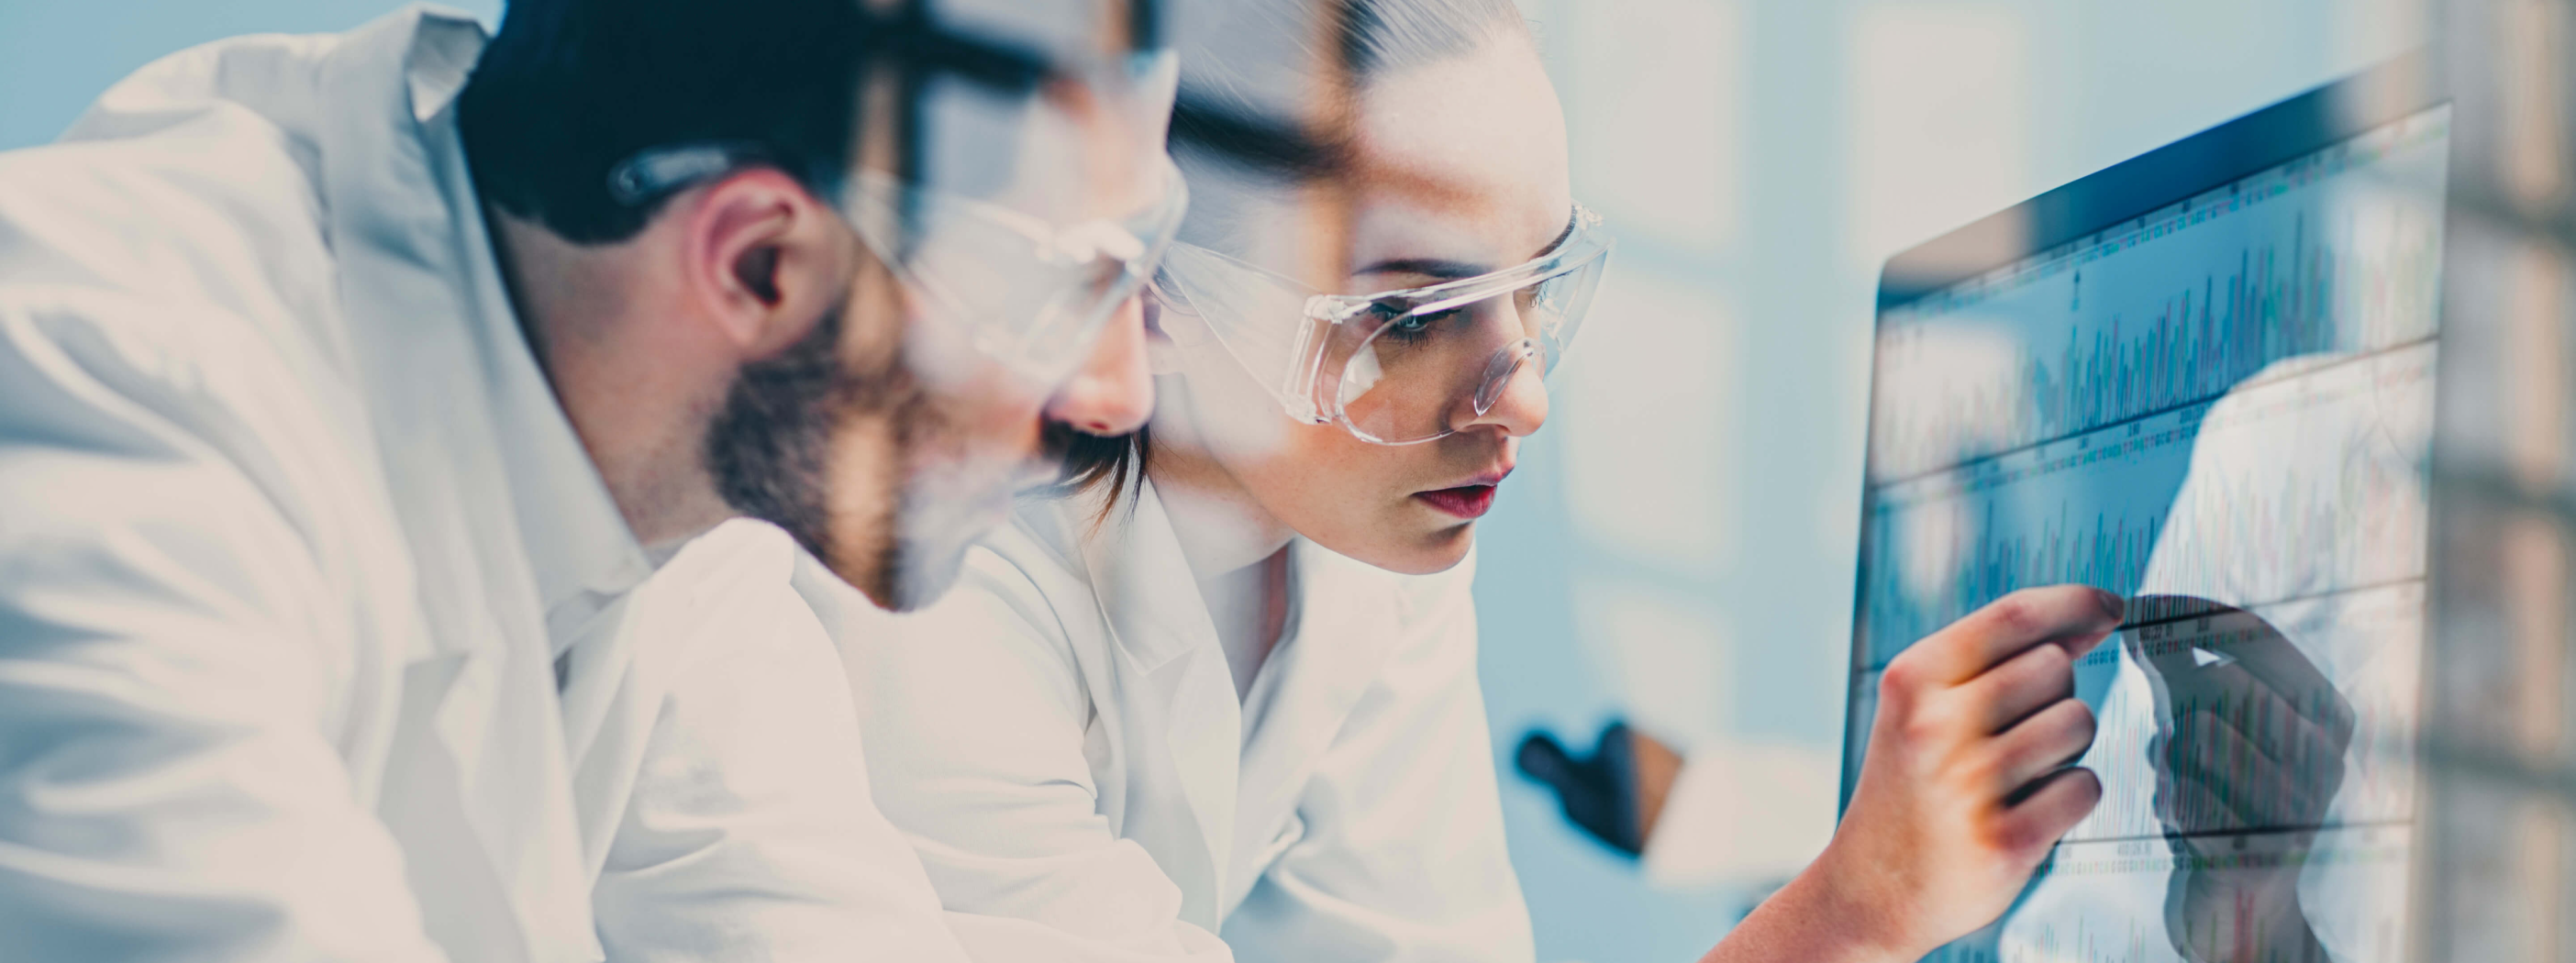 a stock photo showing a man and a woman wearing lab goggles in a lab type environment and pointing at some data in a screen